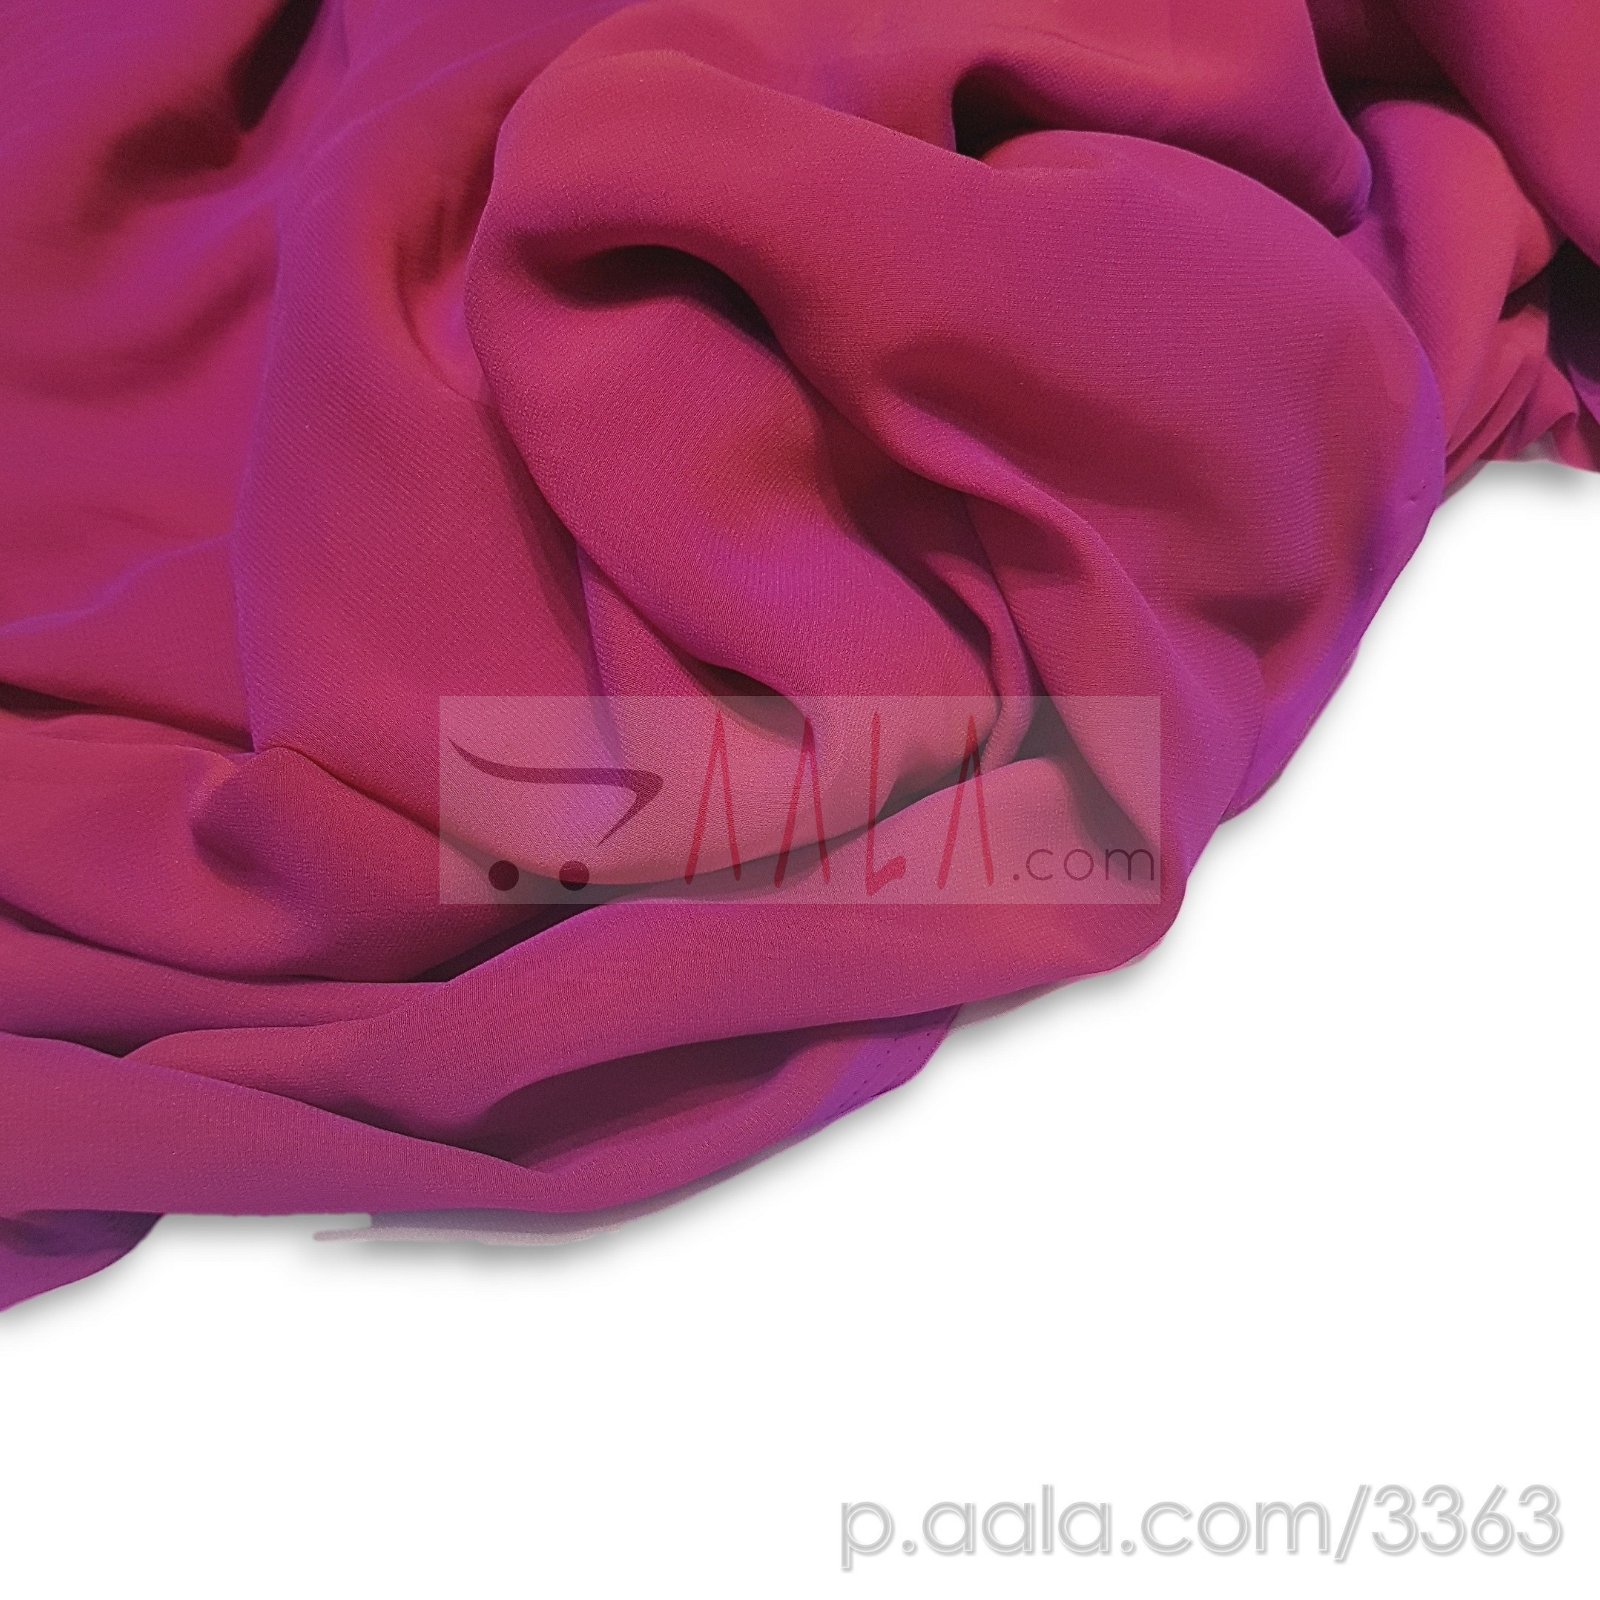 PT Tone Georgette Poly-ester 44 Inches Dyed Per Metre #3363